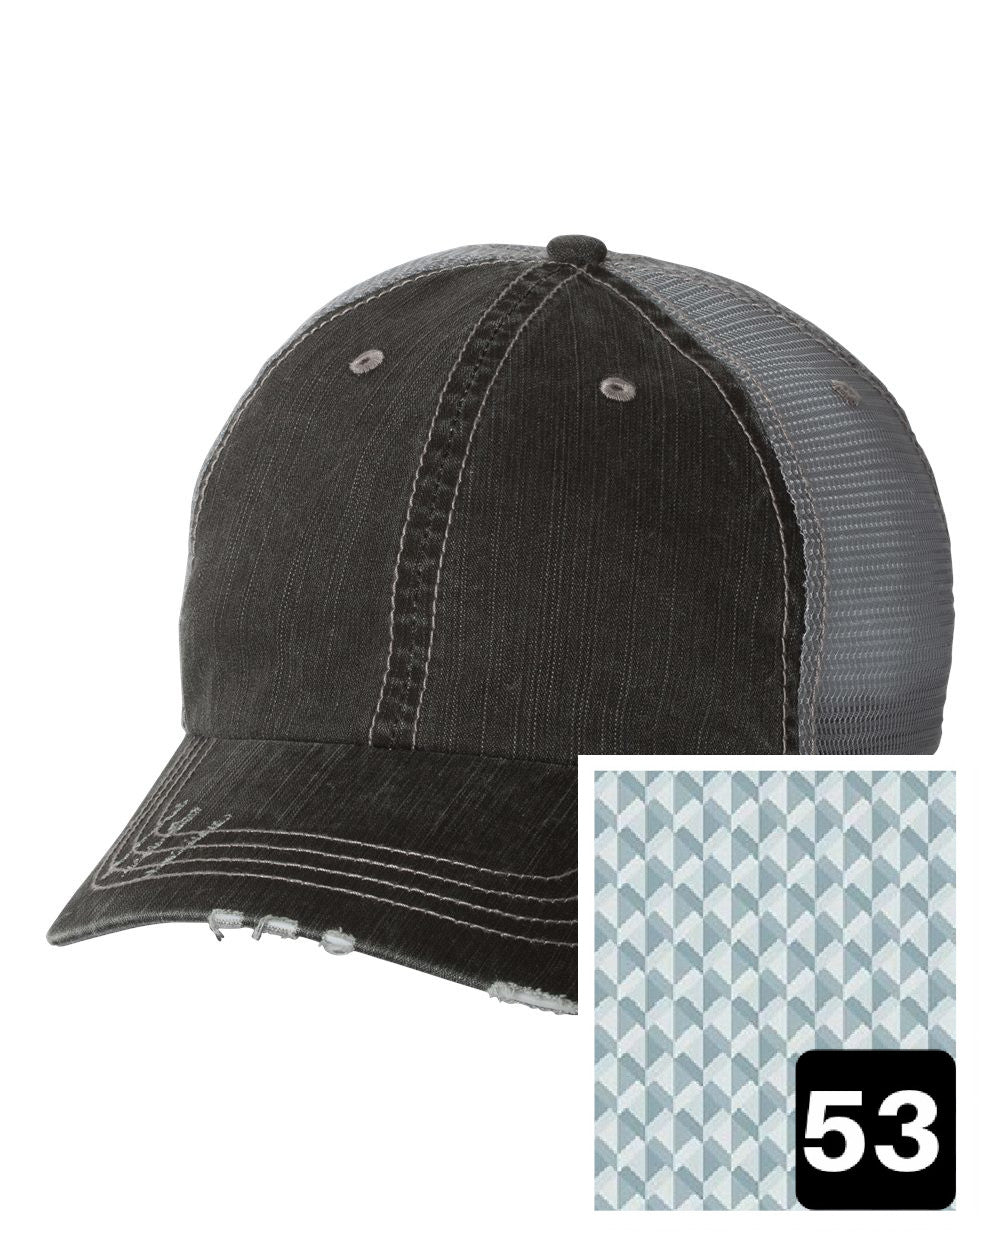 gray distressed trucker hat with multi-color stripe fabric state of UP of Michigan